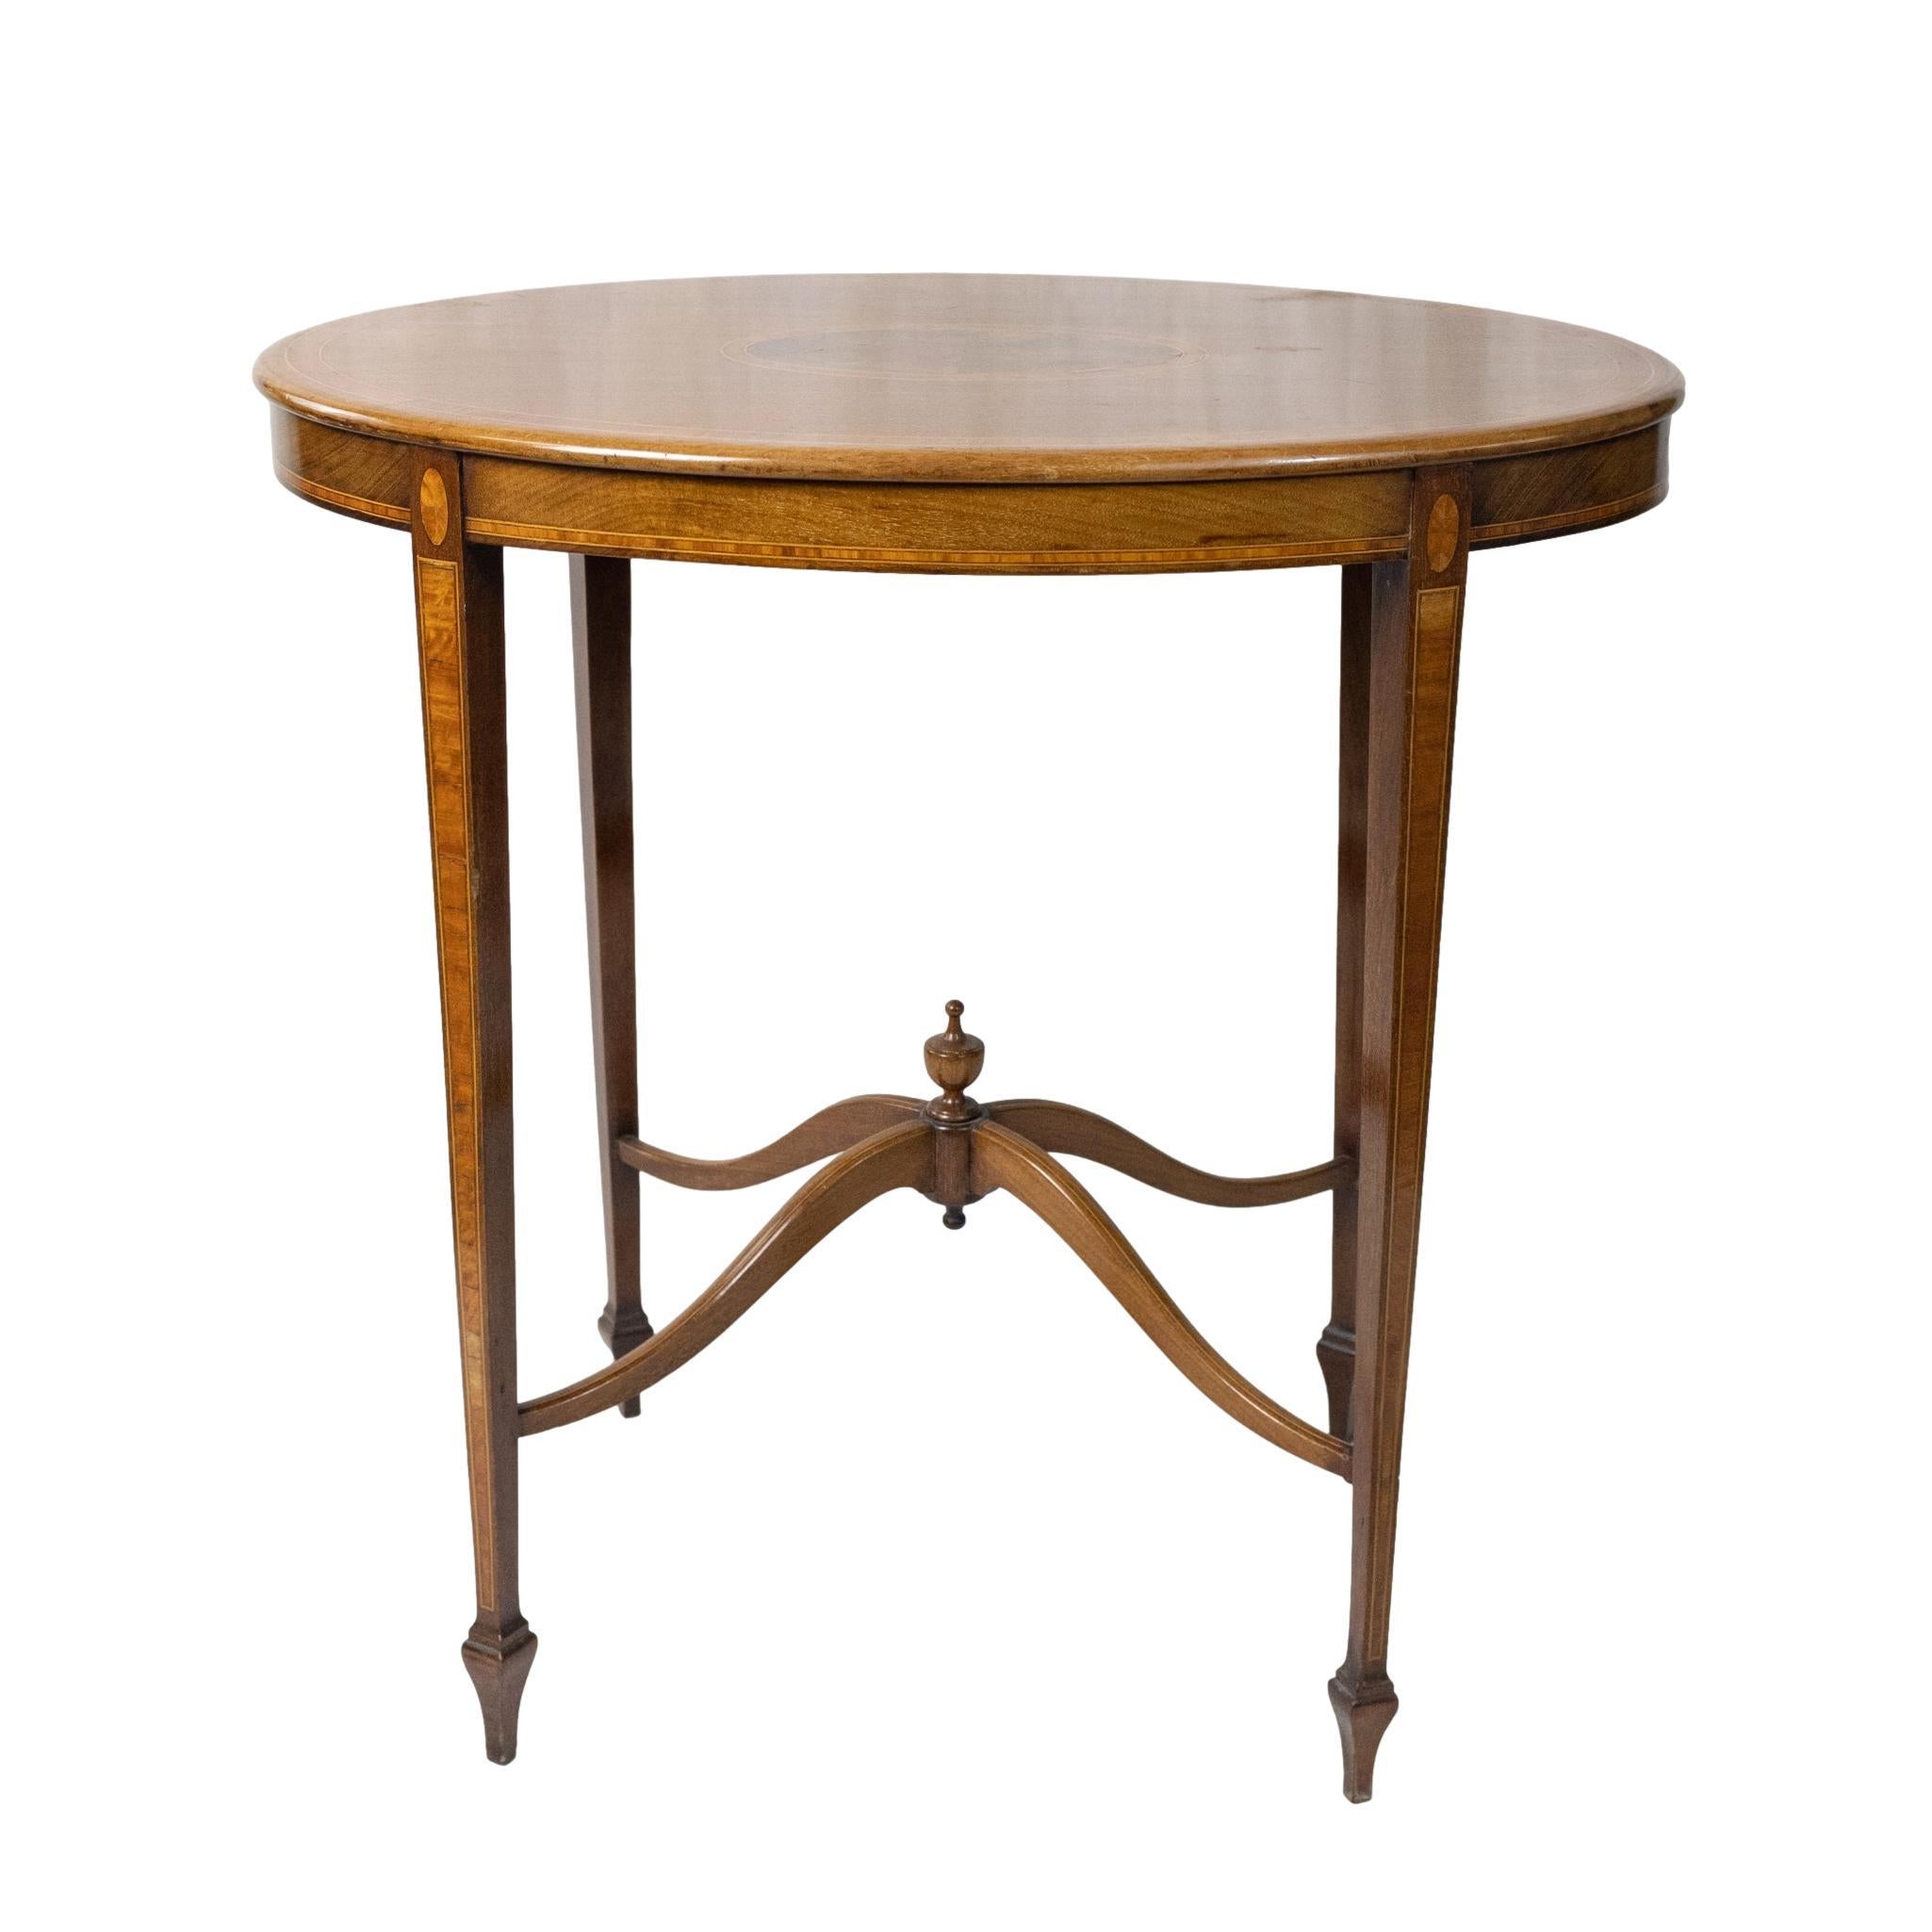 Figured Mahogany and Satinwood-Inlaid Oval Occasional Table, English, ca. 1890 In Good Condition For Sale In Banner Elk, NC